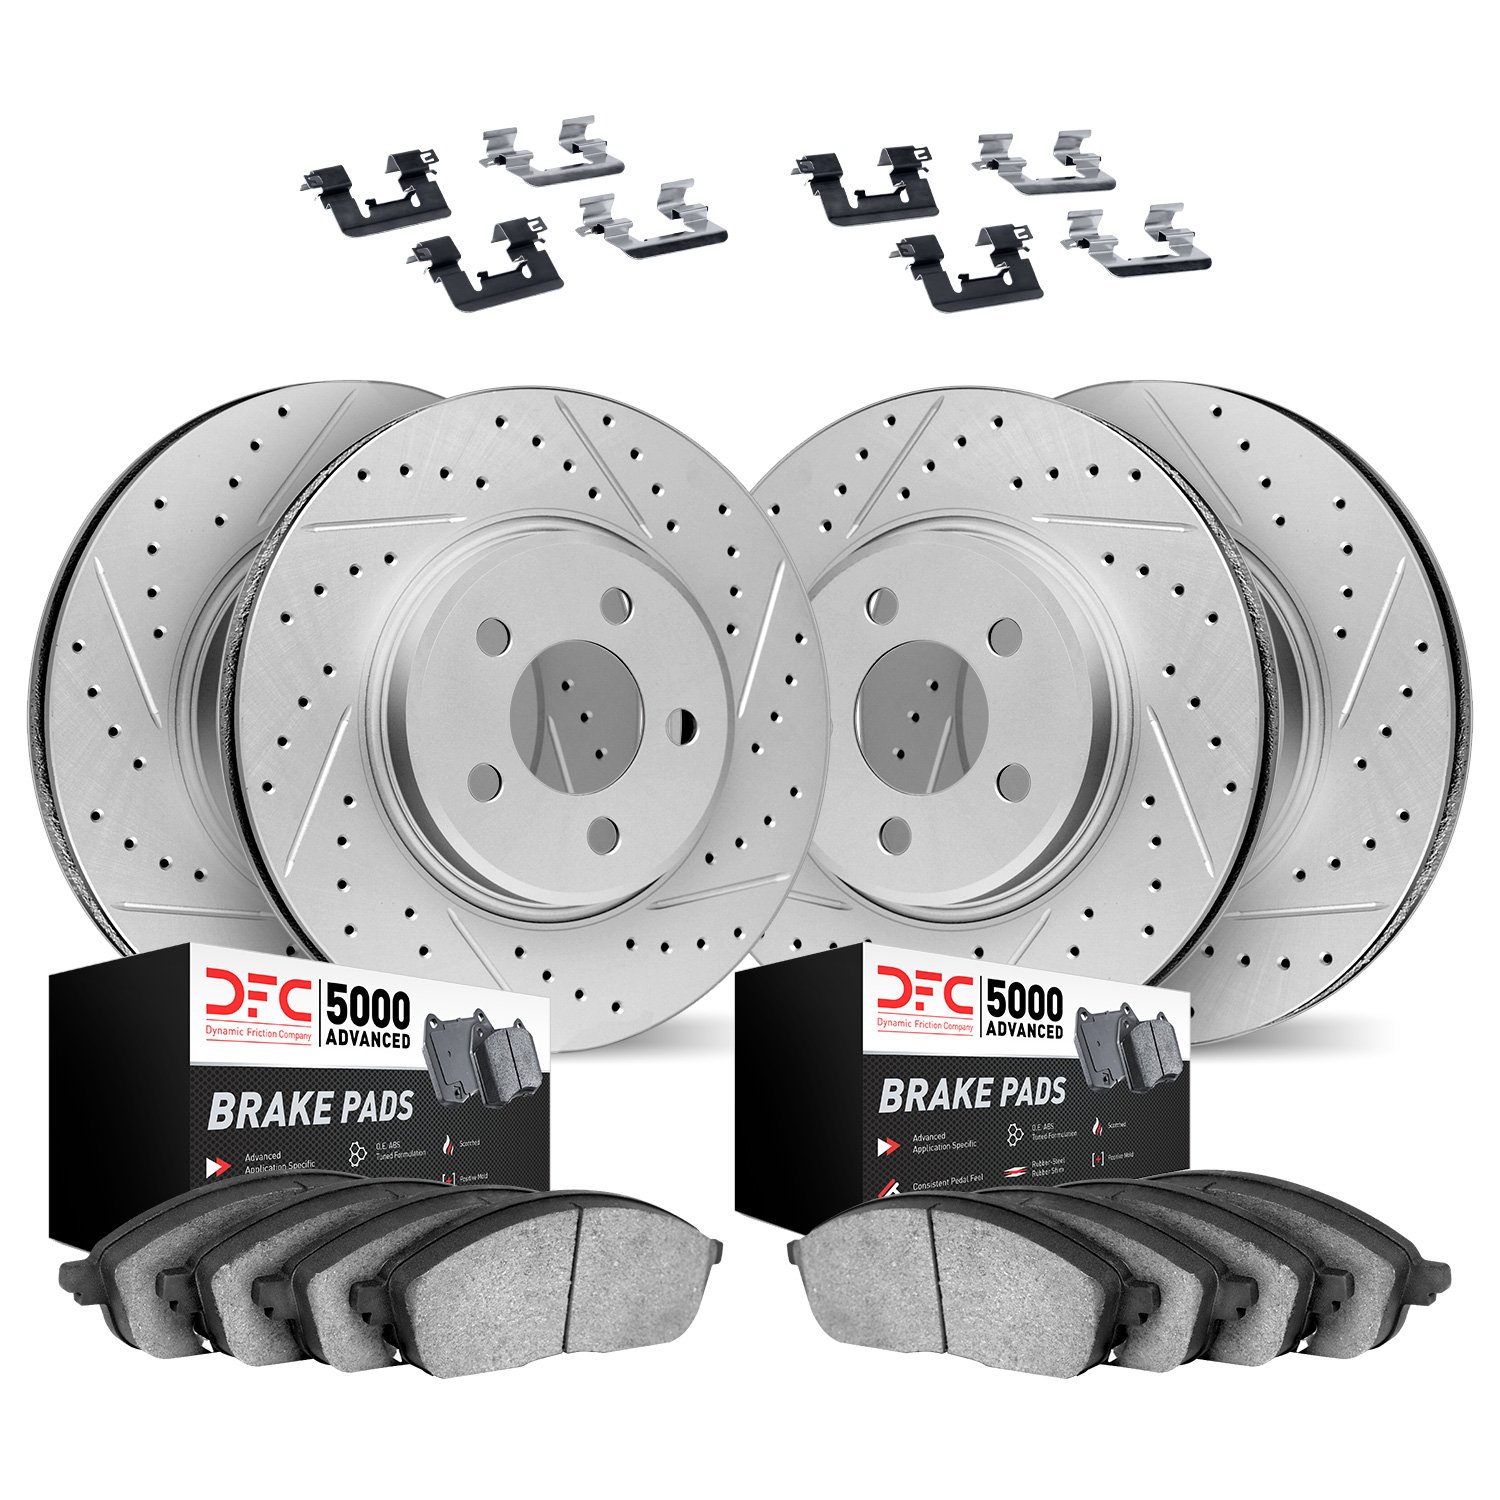 2514-13013 Geoperformance Drilled/Slotted Rotors w/5000 Advanced Brake Pads Kit & Hardware, 2015-2015 Subaru, Position: Front an